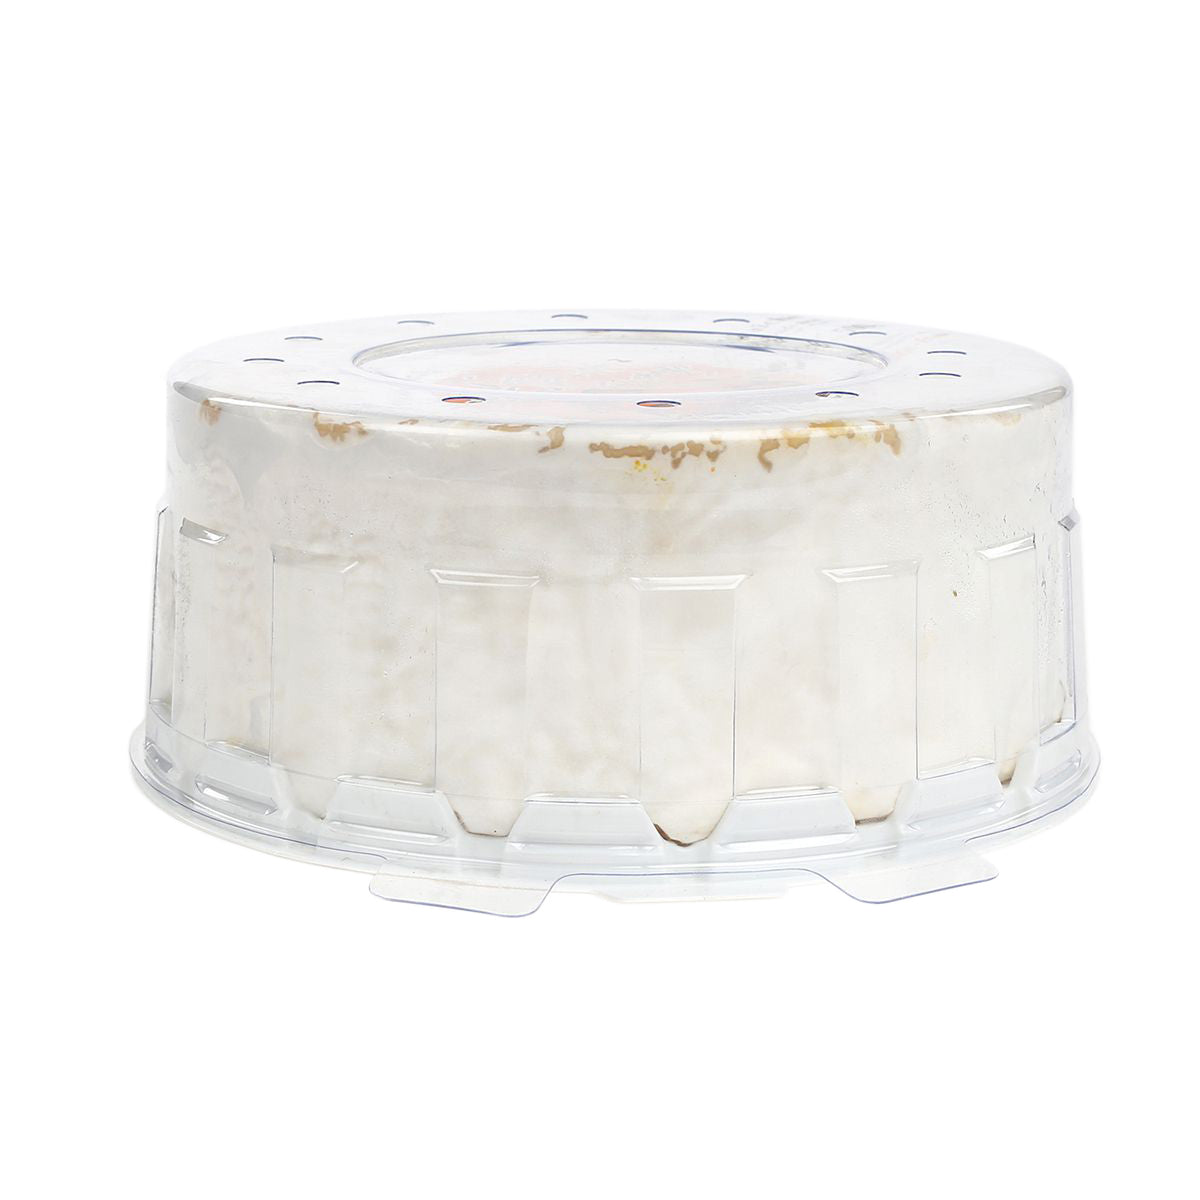 Fromagerie St. Clair Pierre Robert Triple Cream Cheese